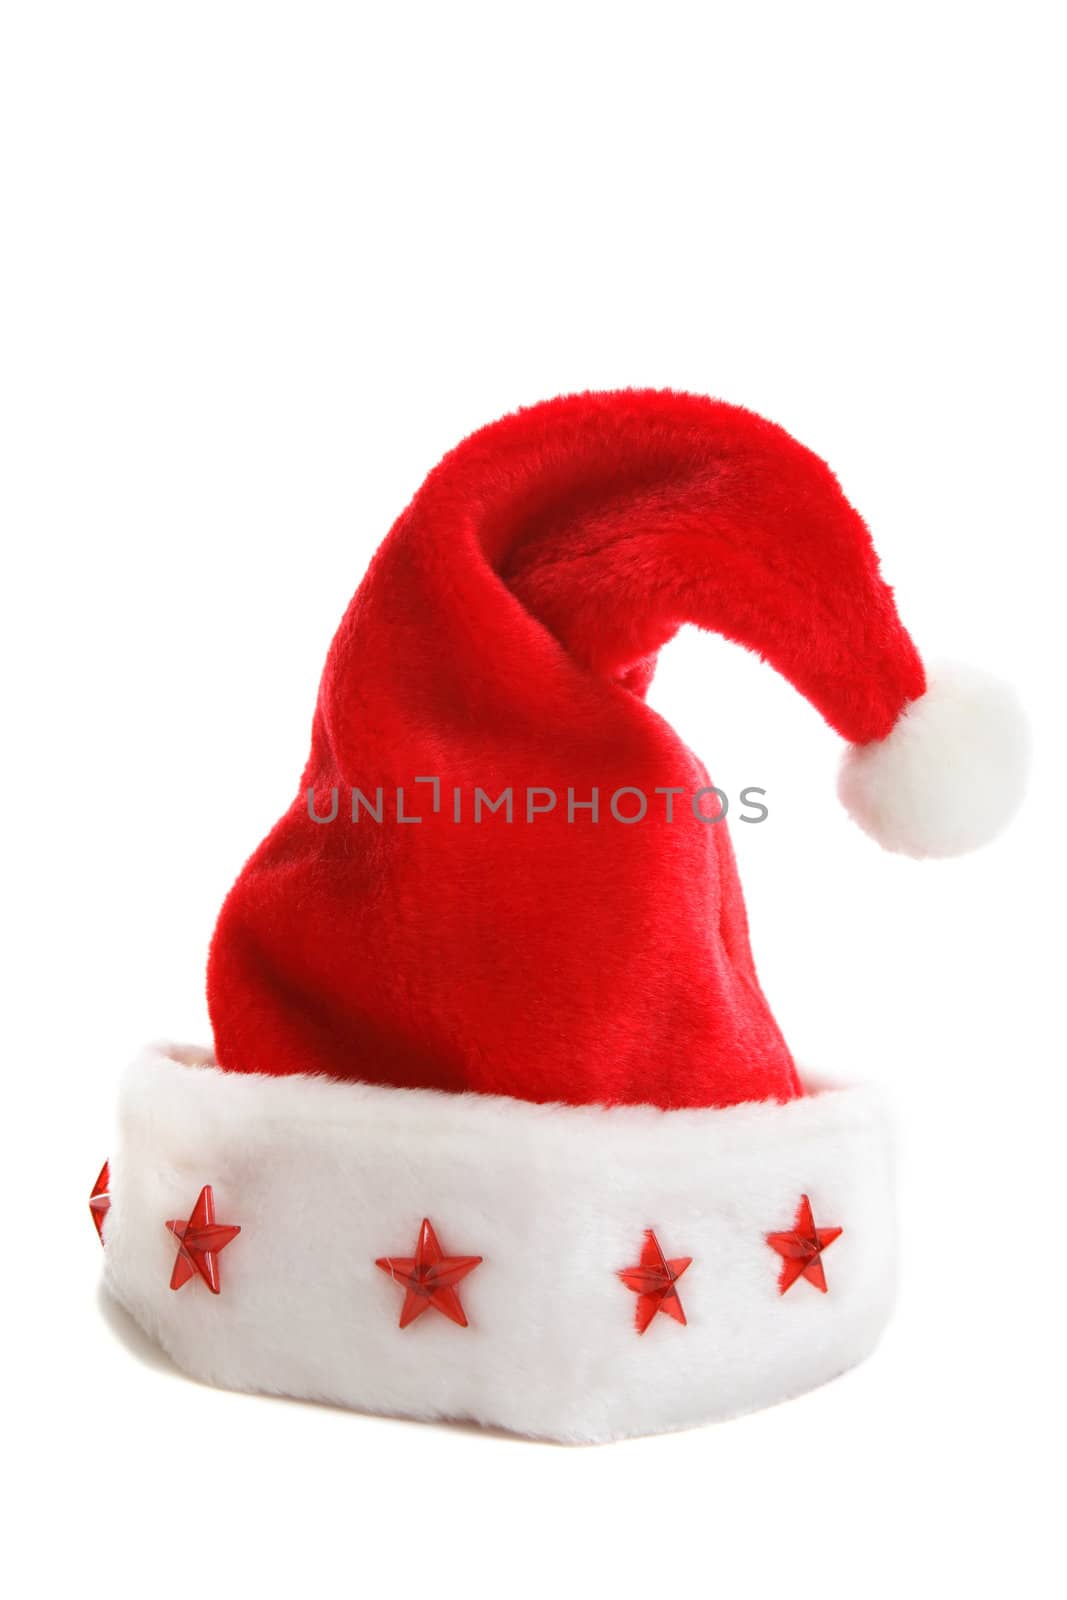 A Santa hat with red stars decorating the rim sitting on a  plain white backdrop